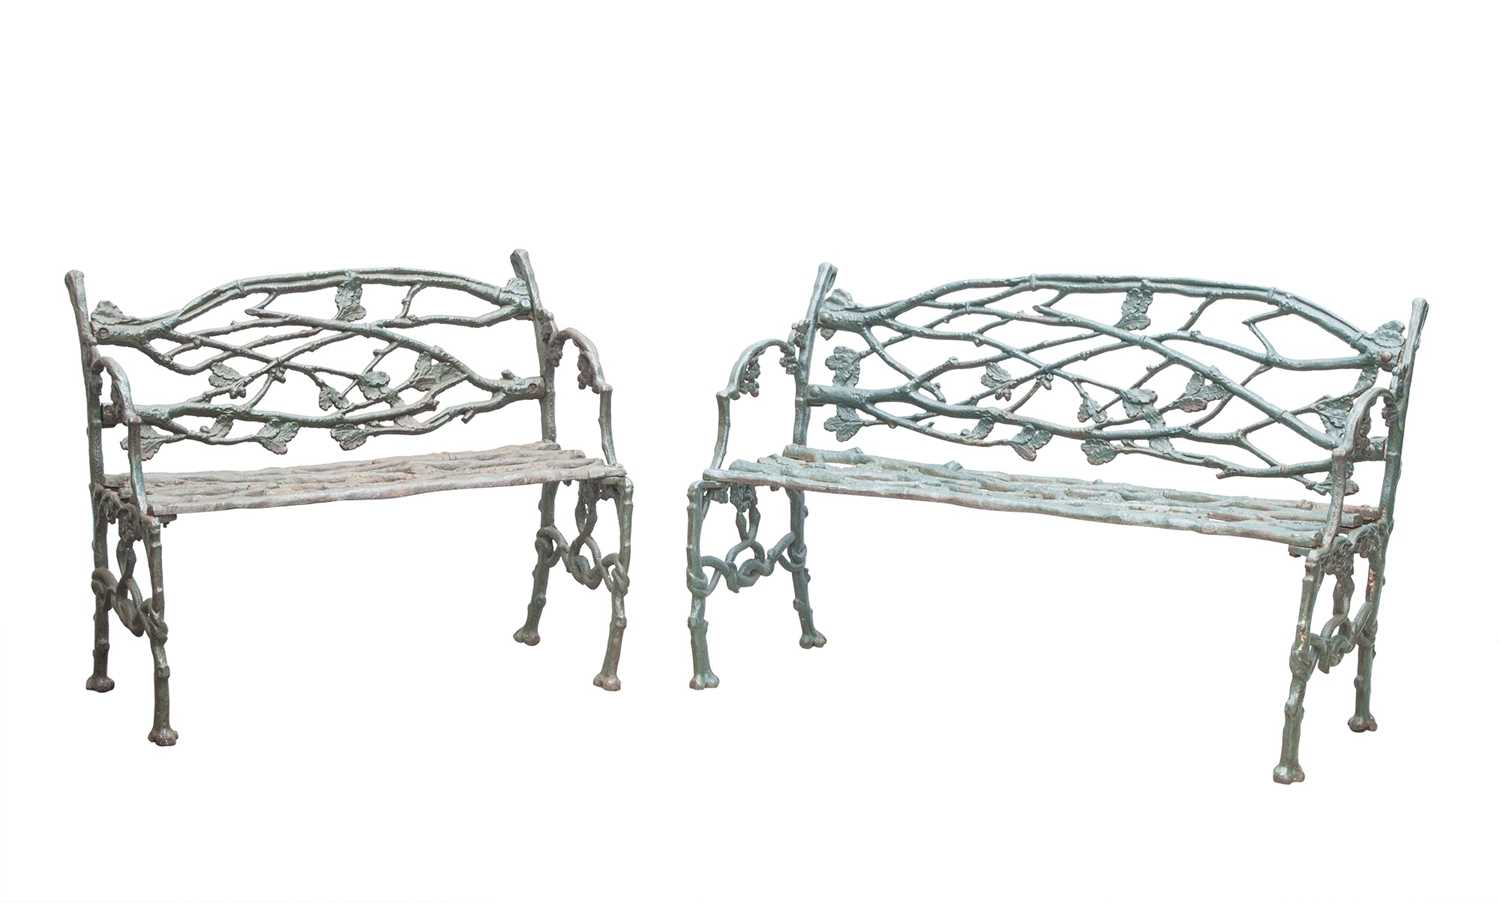 Lot 292 - Two Green Painted Cast Iron Garden Benches